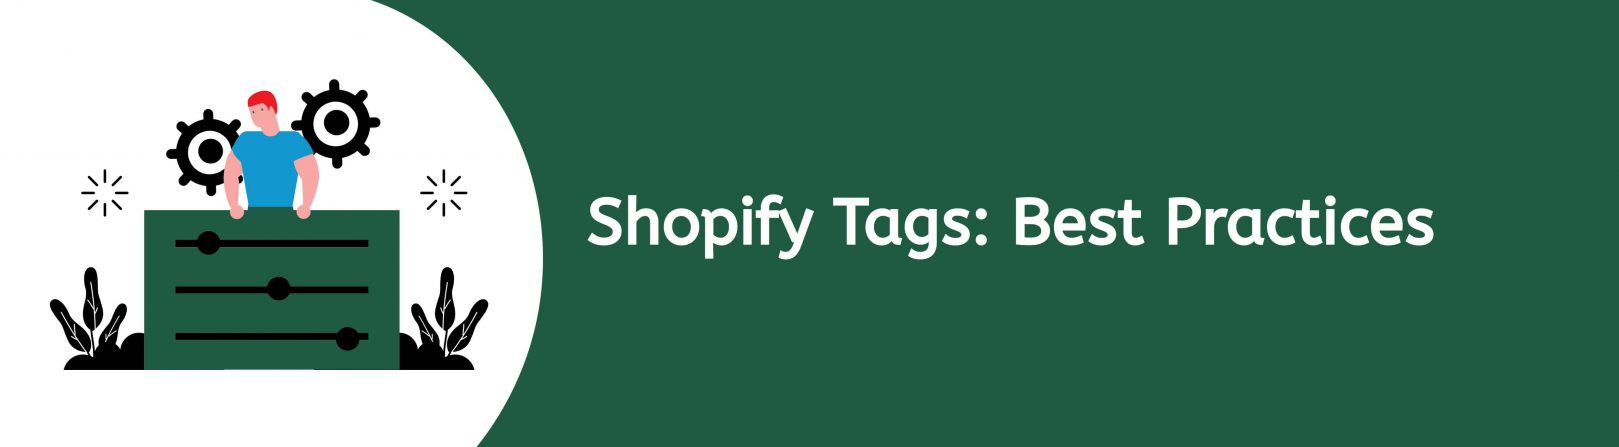 shopify-tags-guide